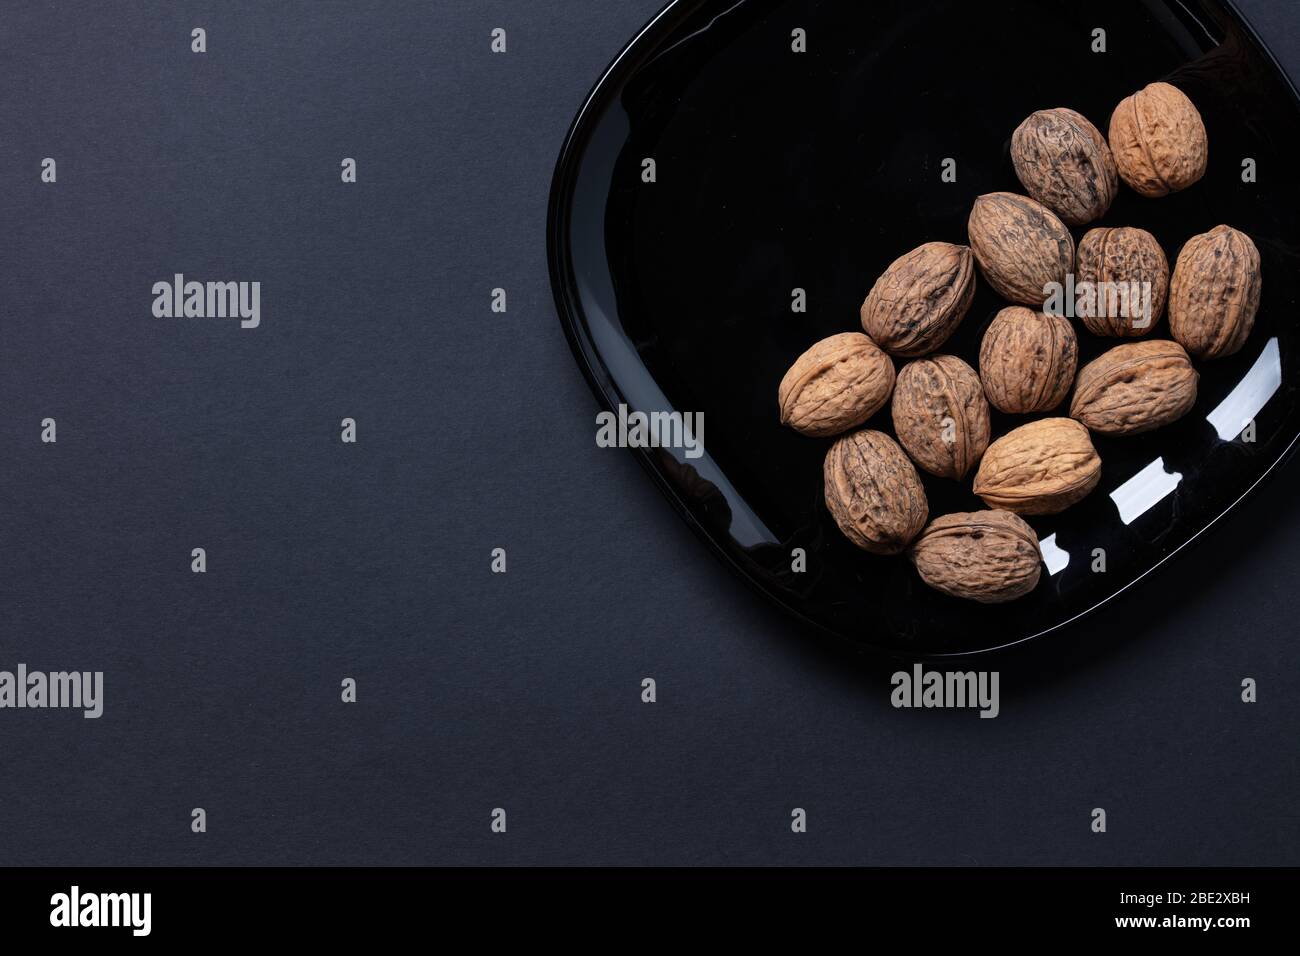 a fantastic still-life studio image of wallnuts on a black plate on black dark background, topview, copy space Stock Photo